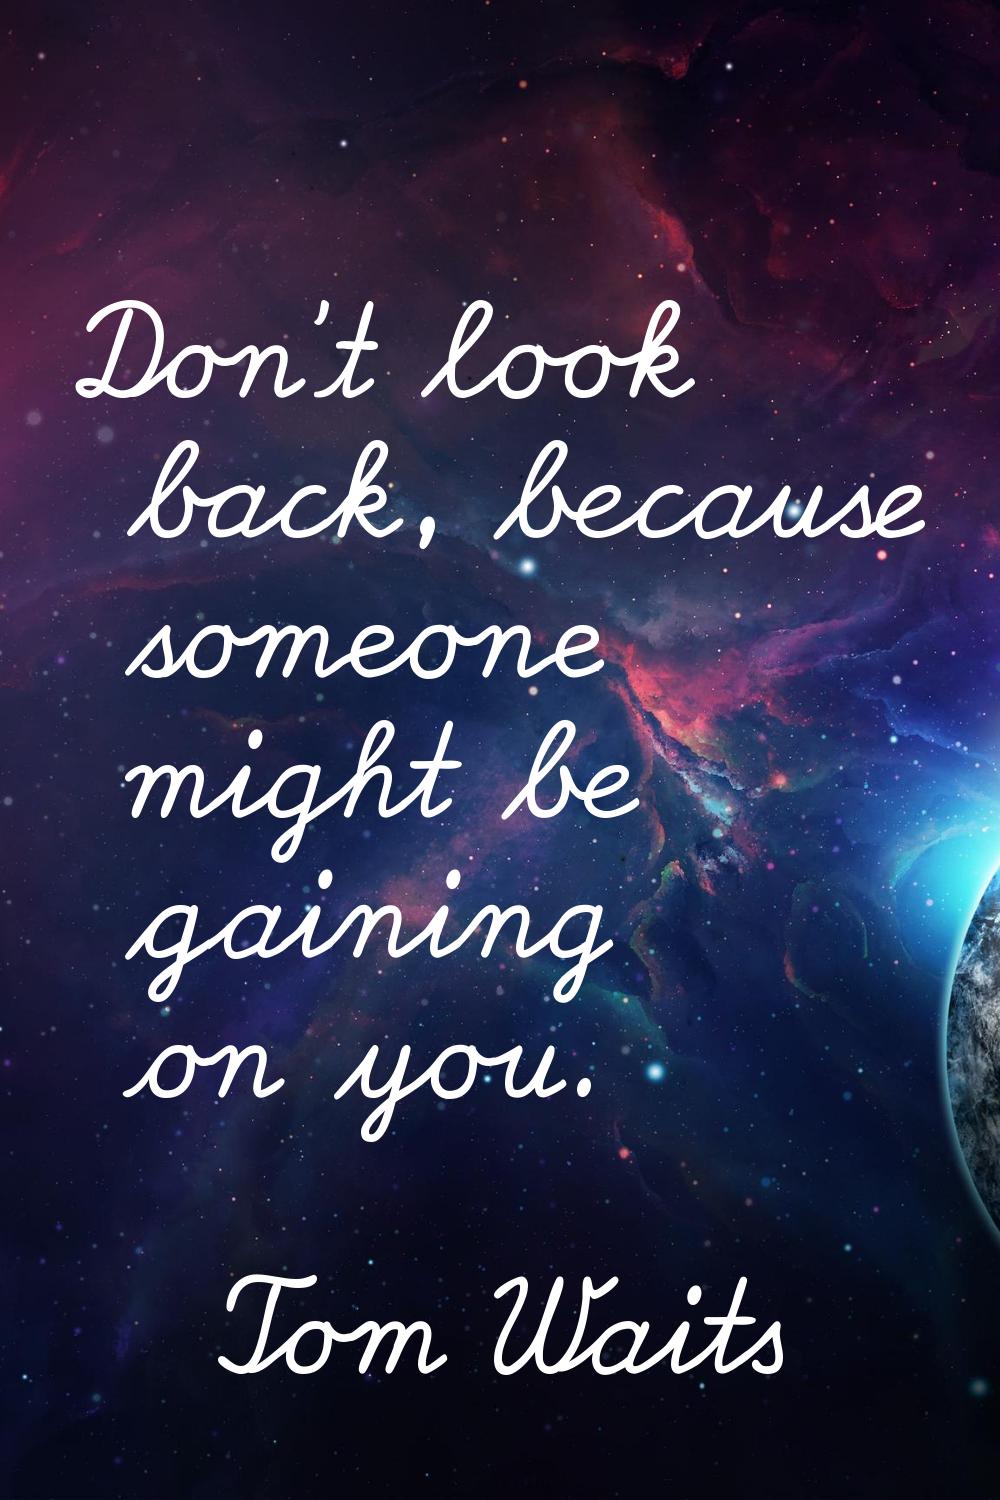 Don't look back, because someone might be gaining on you.